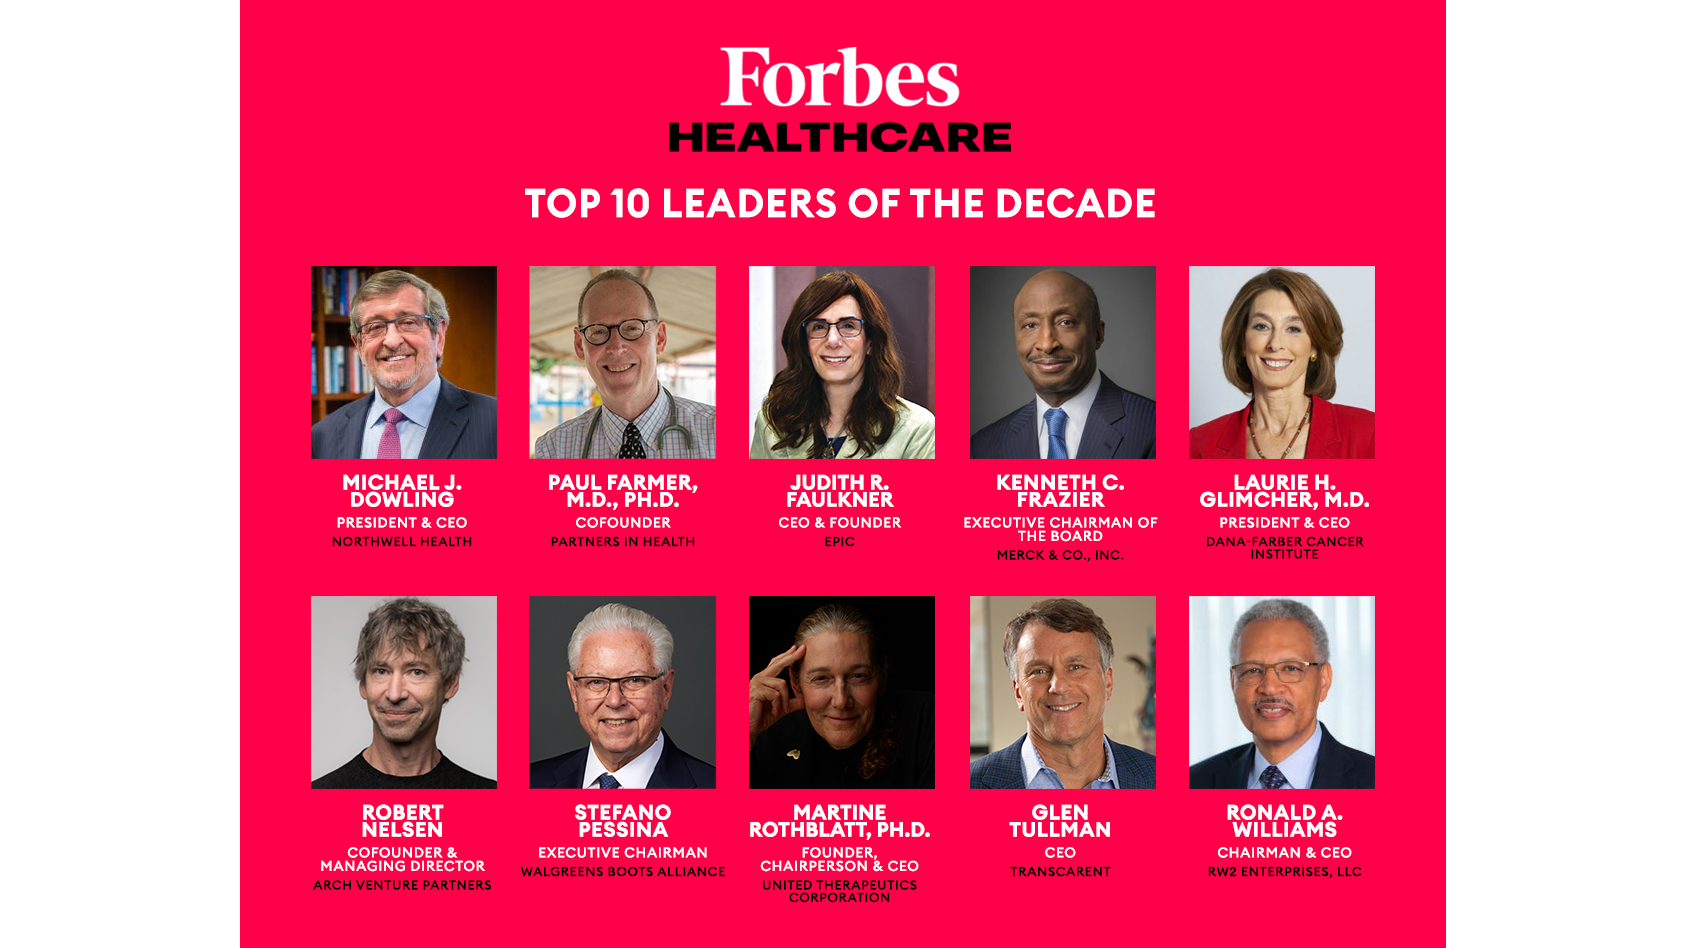 Stefano Pessina is a Forbes Top 10 Leader of the Decade